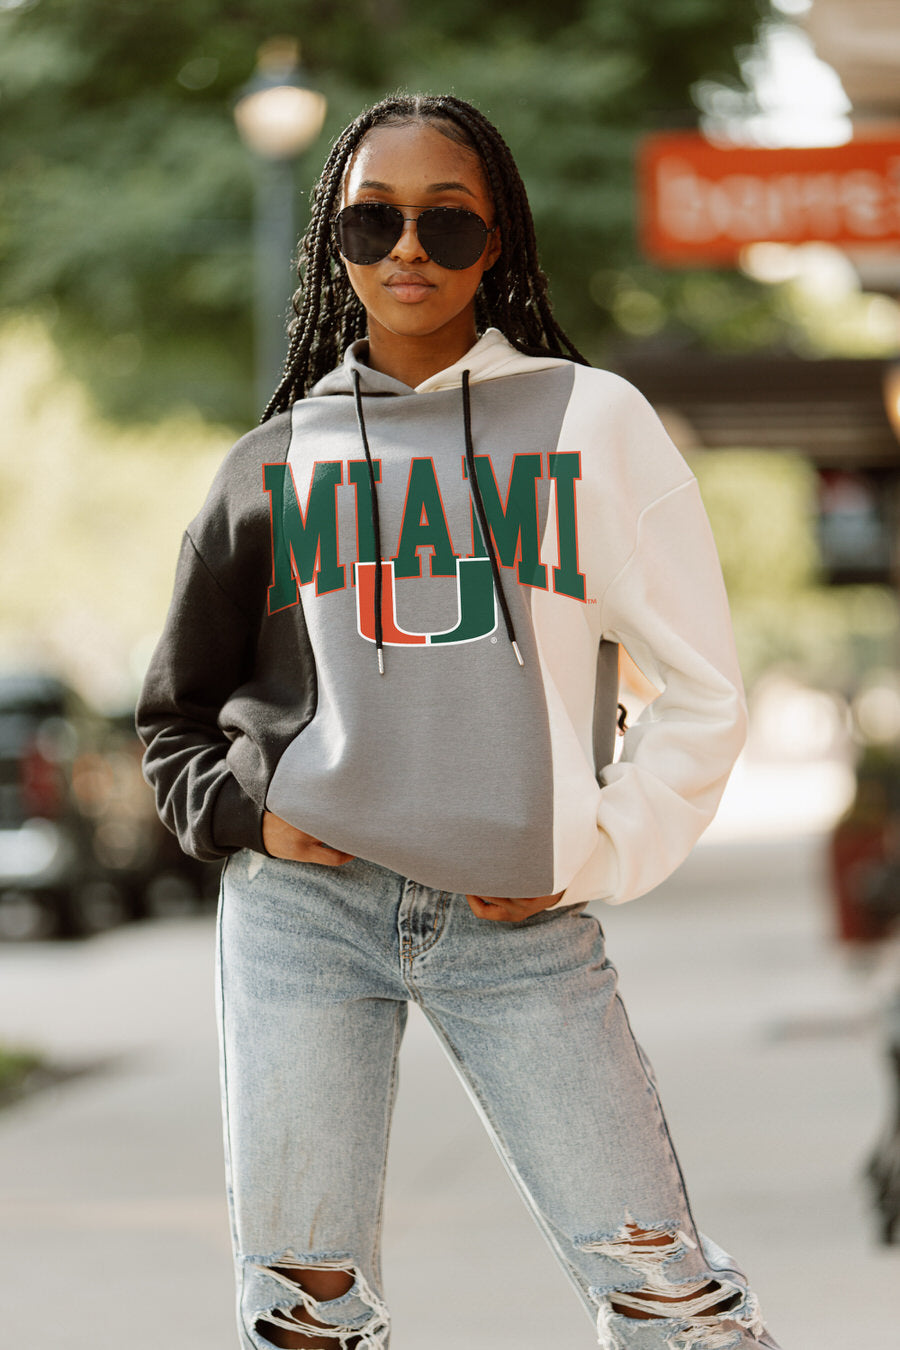 MIAMI HURRICANES GUESS WHO'S BACK SEQUIN YOKE PULLOVER